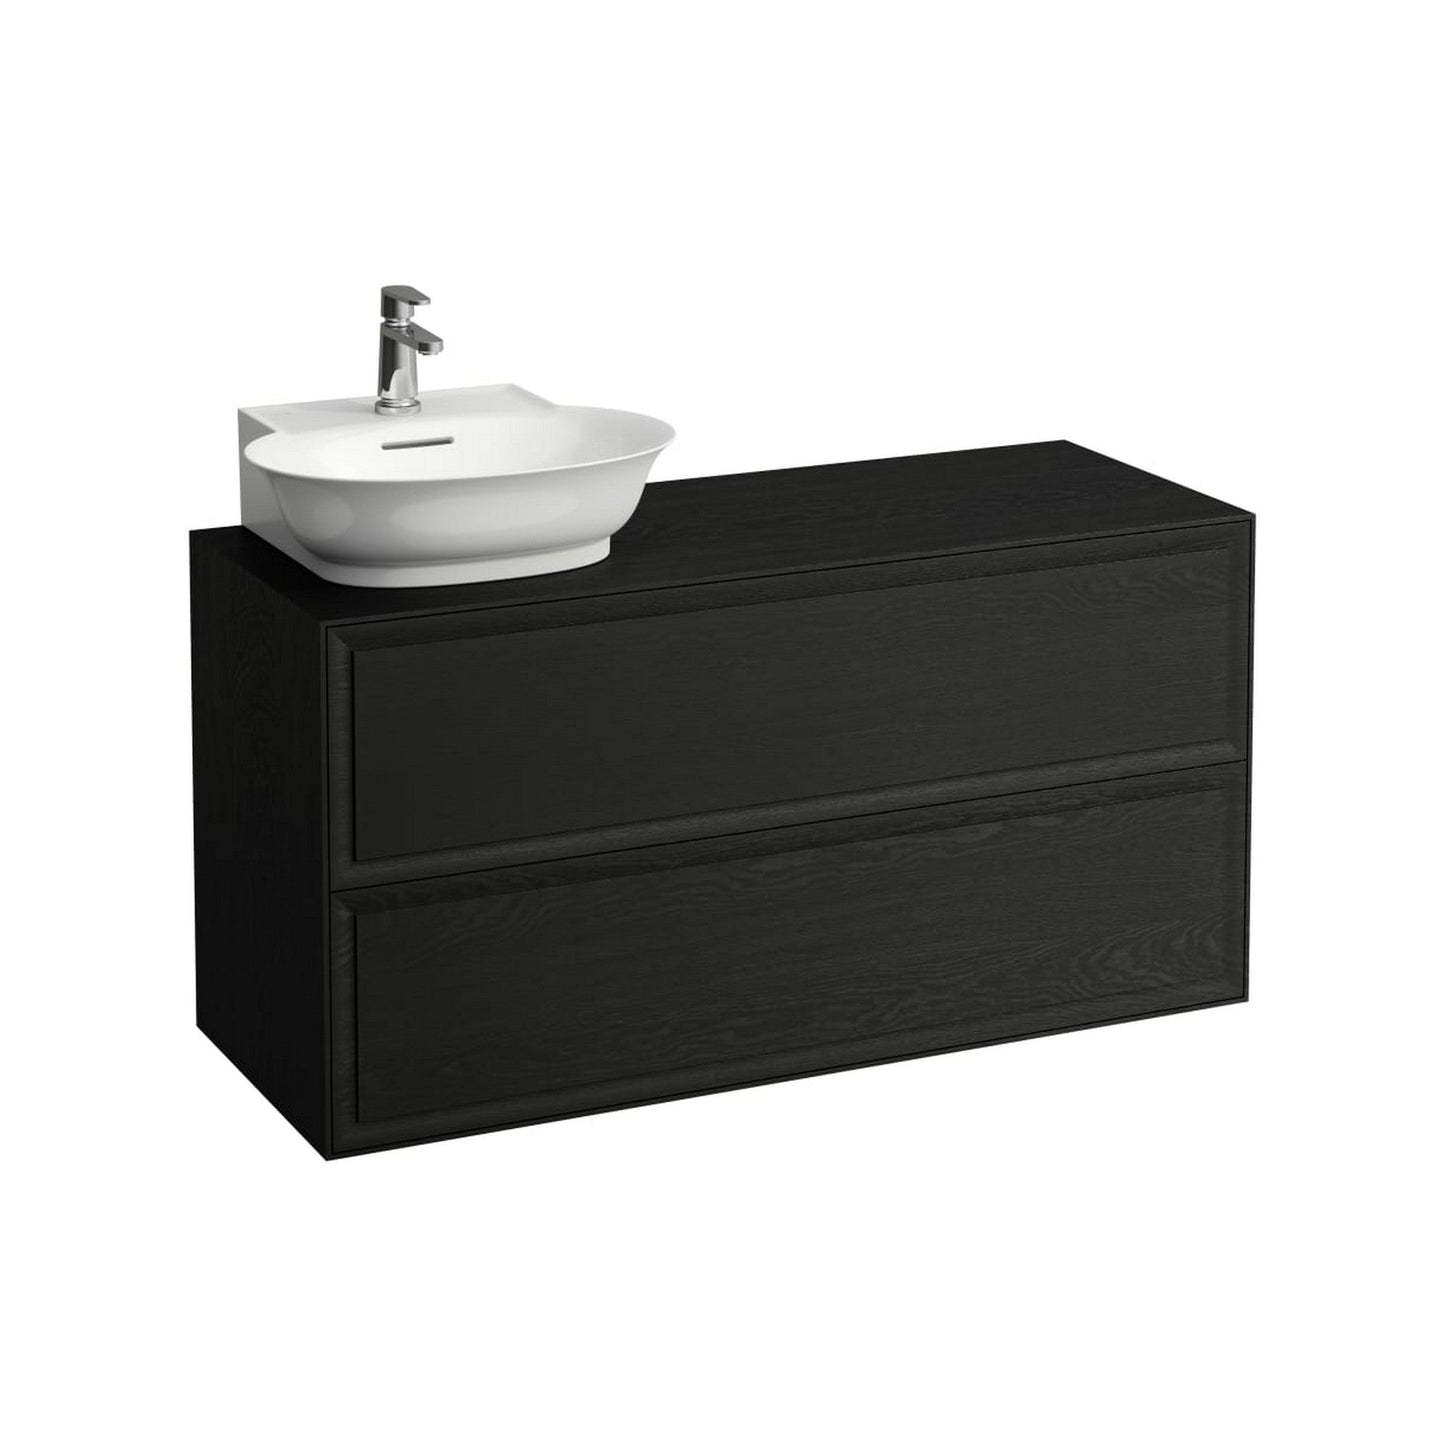 Laufen New Classic 46" 2-Drawer Blacked Oak Wall-Mounted Vanity With Sink Cut-out on the Left for New Classic Bathroom Sink Model: H816852